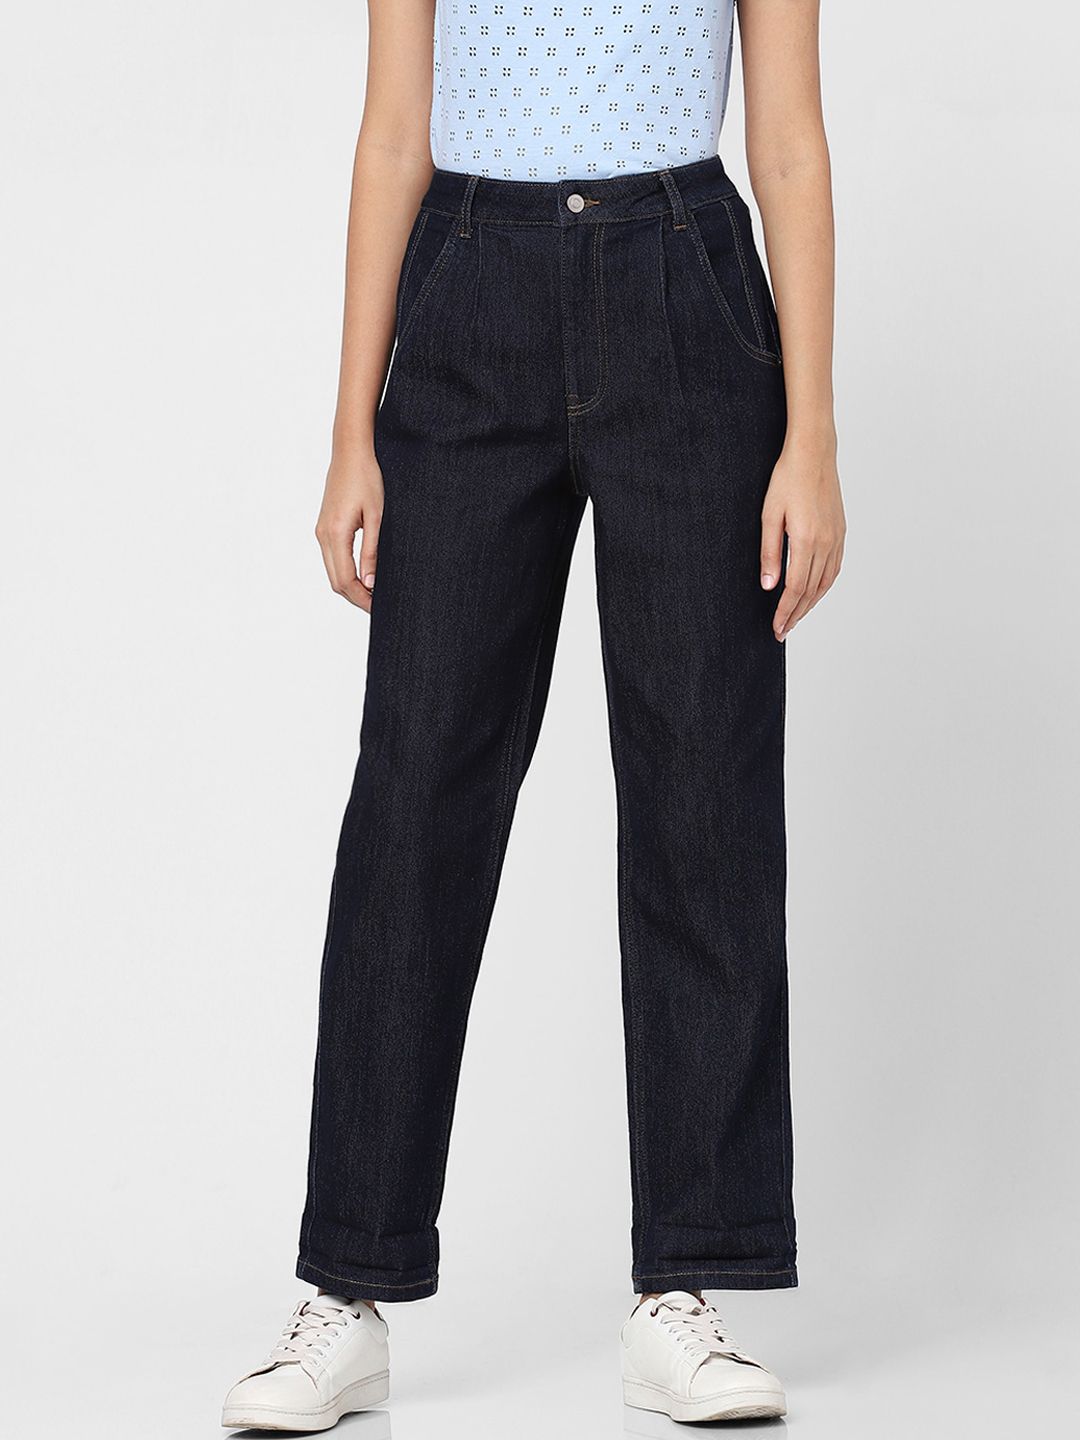 Vero Moda Women Blue Straight Fit High-Rise Jeans Price in India